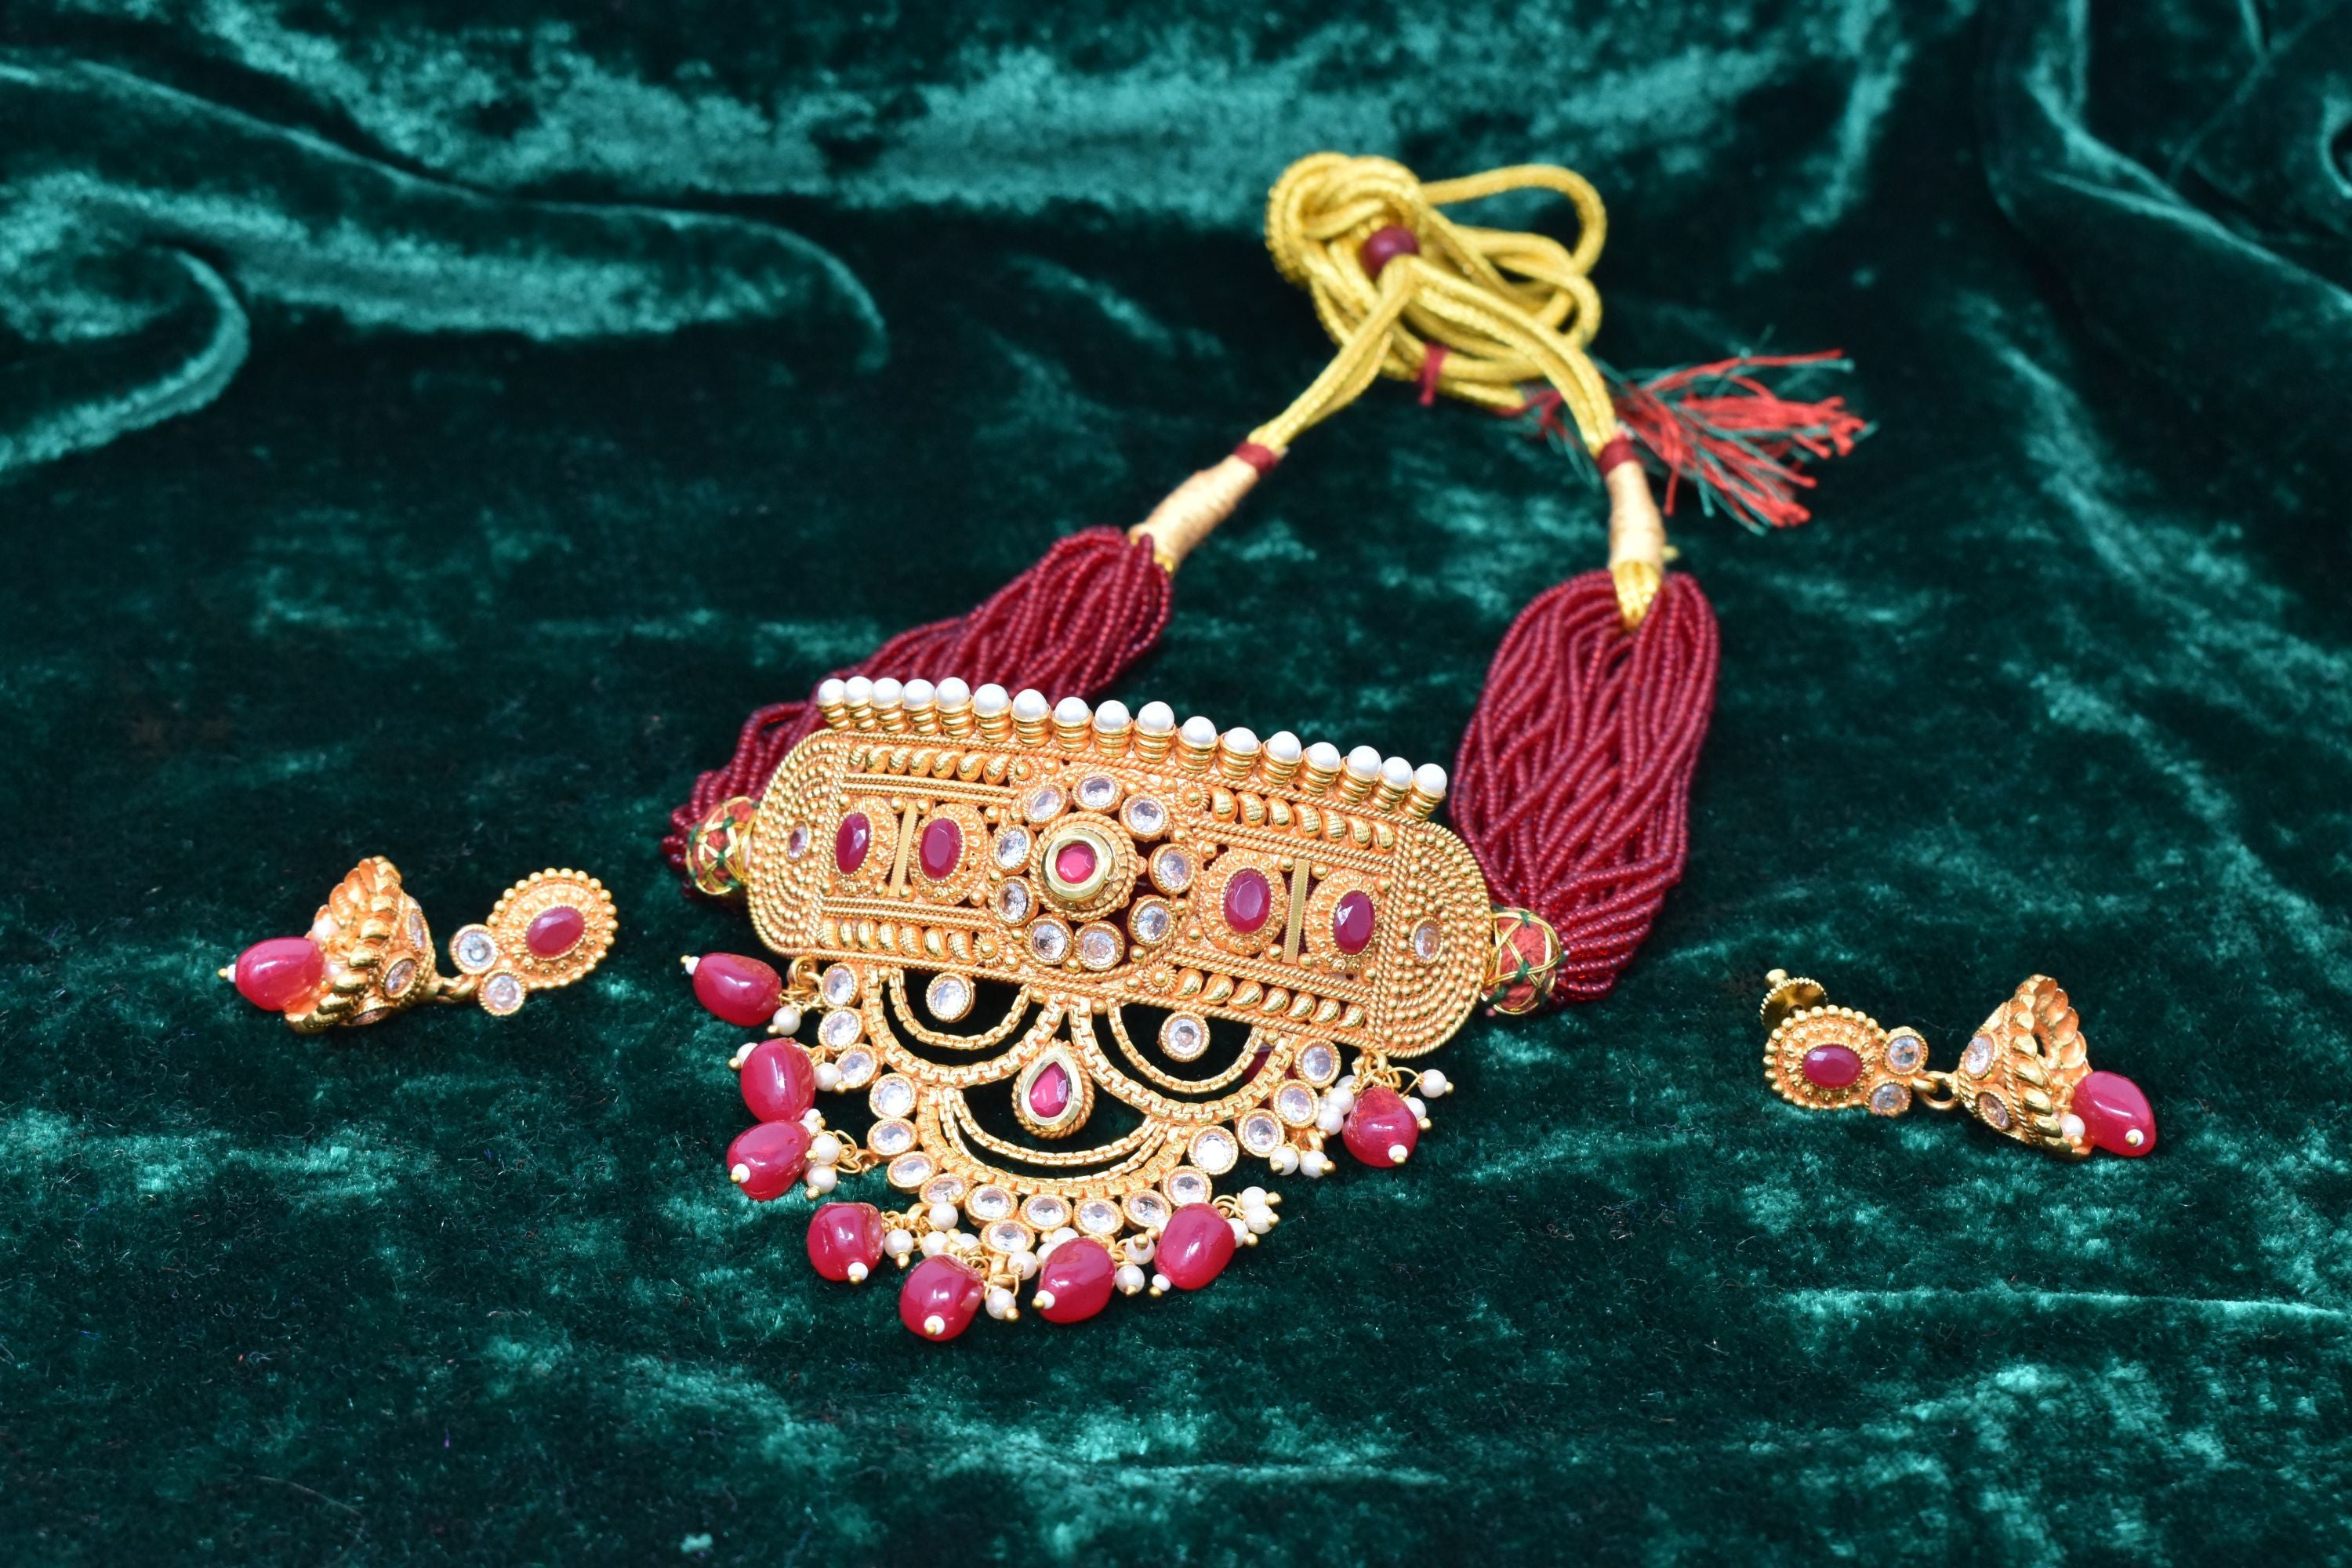 Indian Jewellery from Meira Jewellery:Rajasthani Jewellery,Gold Plated Moon Shape Rajputi Aad with Maroon Beads and Pearls